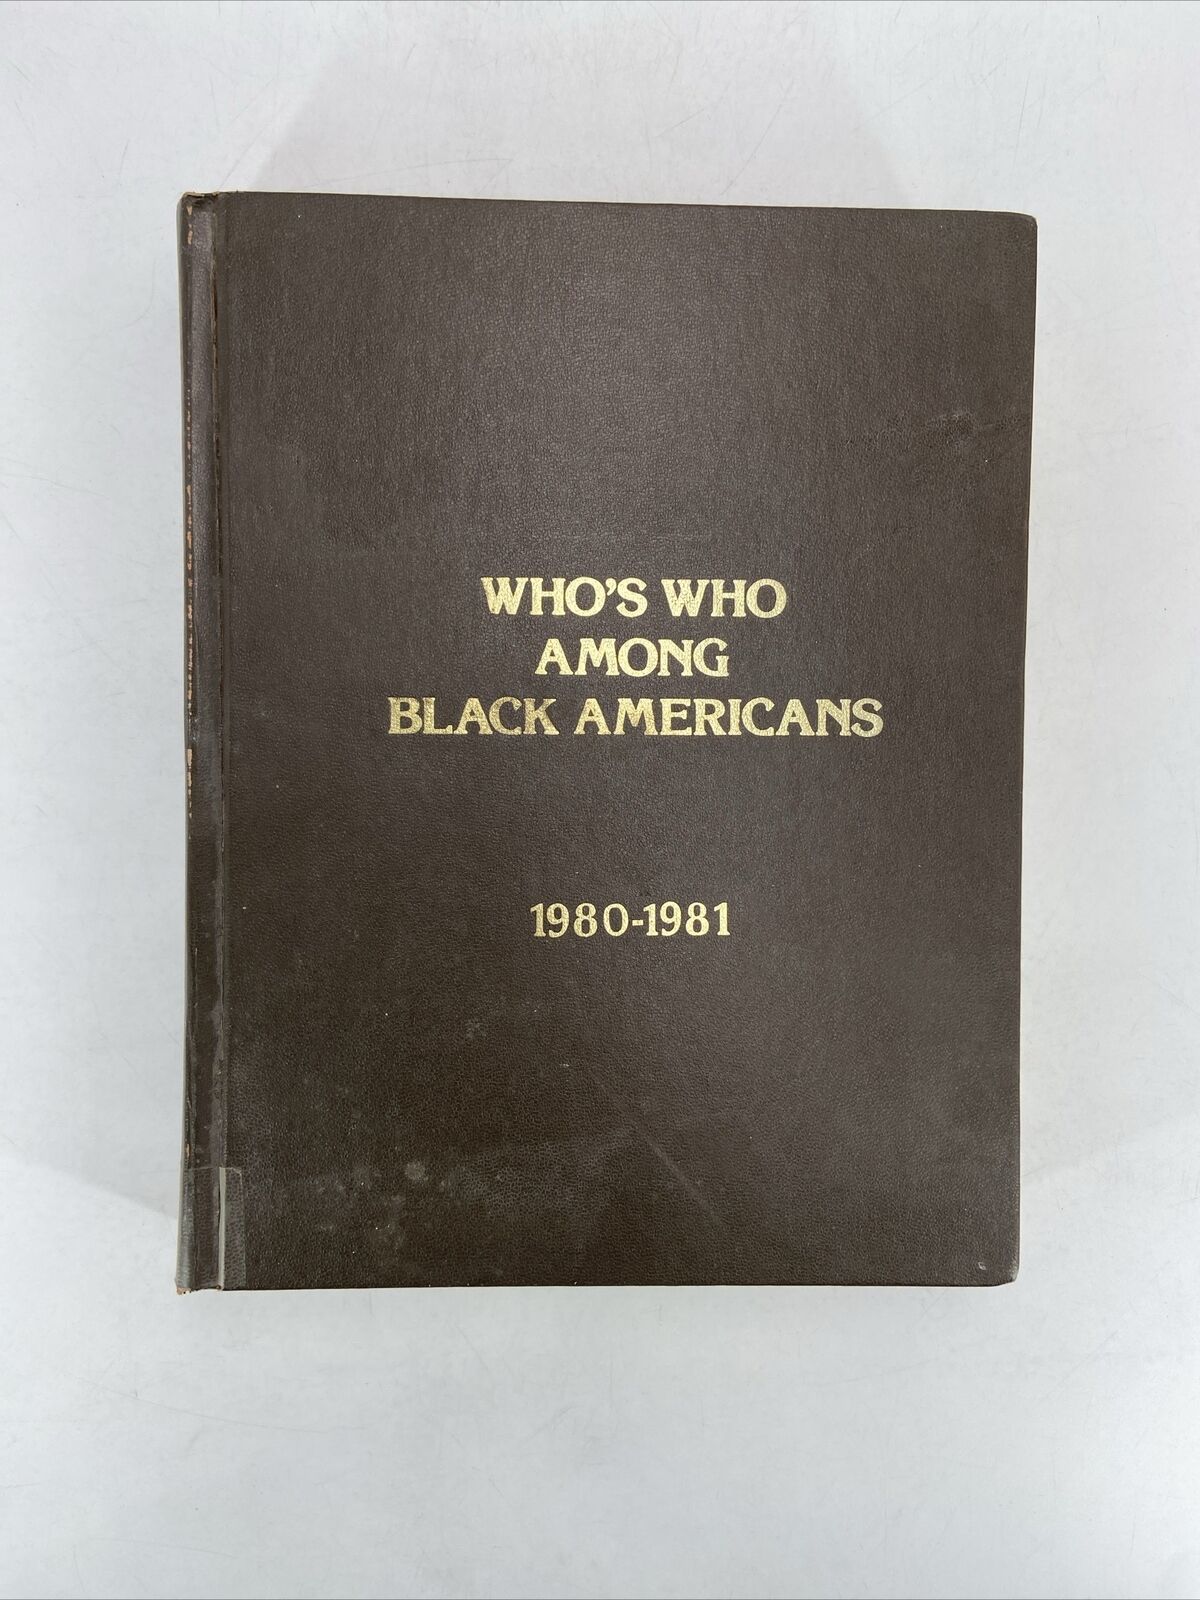 Who's Who Among Black Americans 3rd Edition 1980-1981 Hardcover